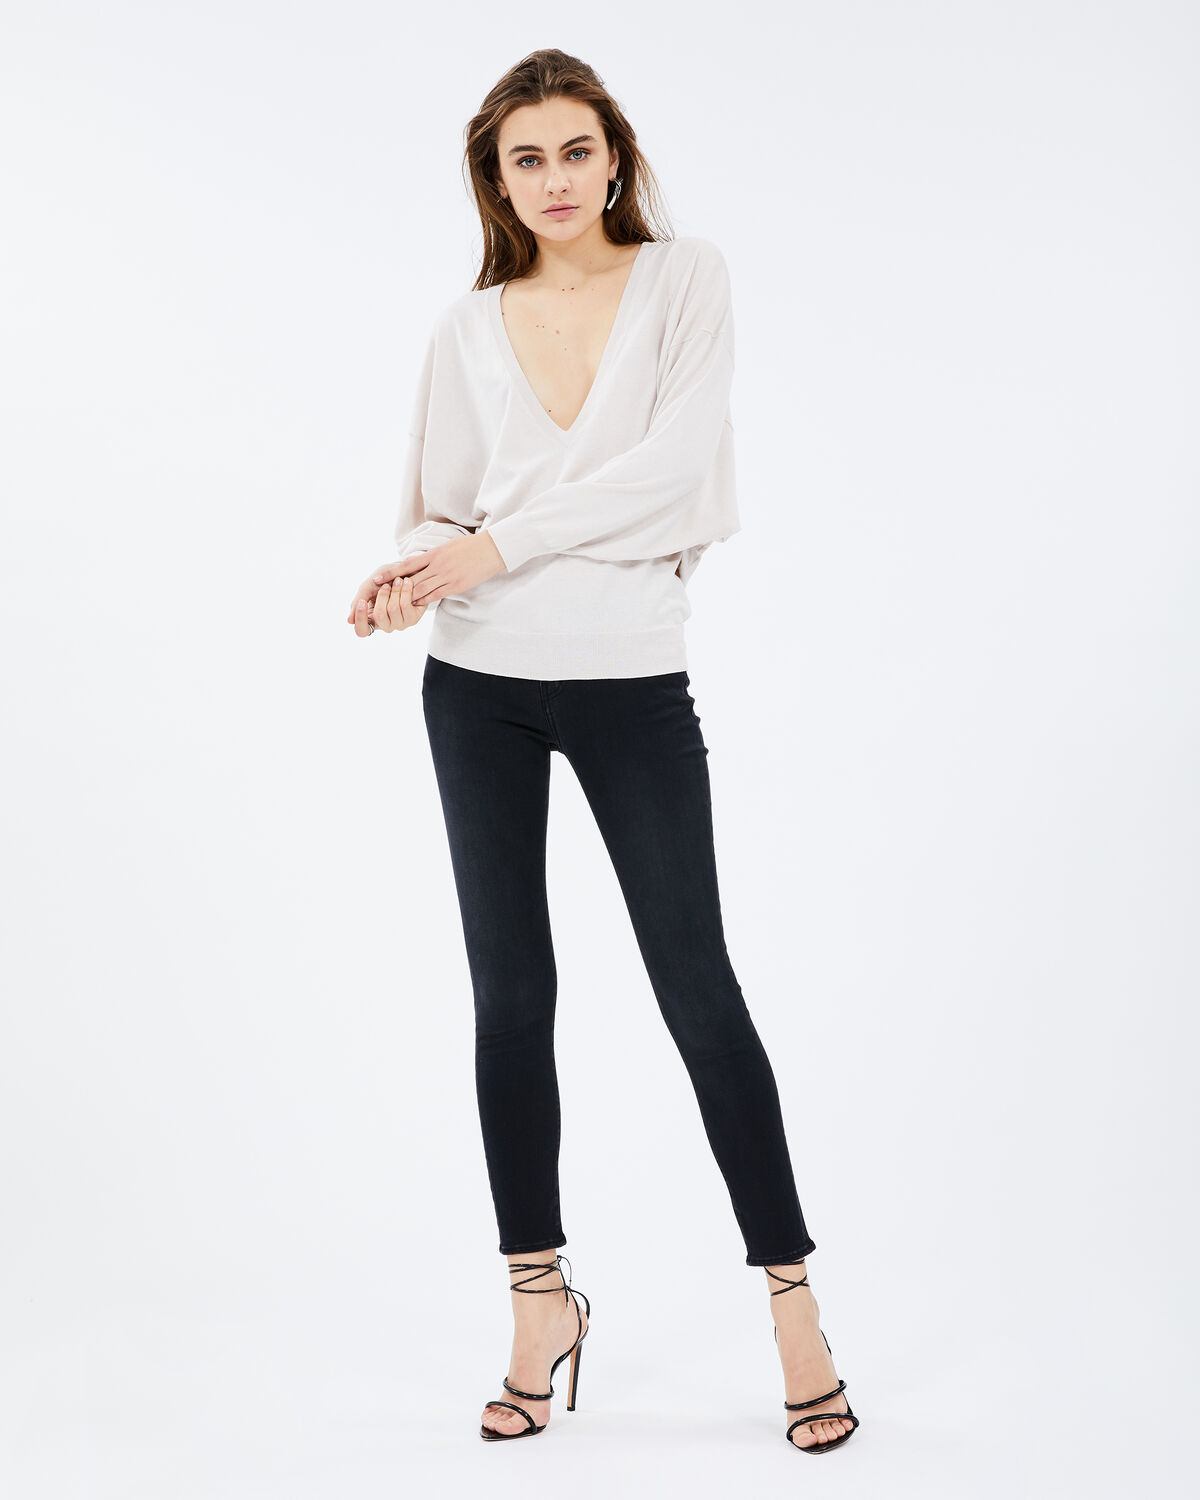 Photo of IRO Paris Remote Sweater Mixed Ecru - This Silk And Cotton Blend Sweater Is Distinguished By Its Oversized Cut And V Neckline. During The Day With Simple Jeans Or In The Evening With A Leather Skirt, It Will Bring A Touch Of Glamour To All Your Outfits. Spring Summer 19